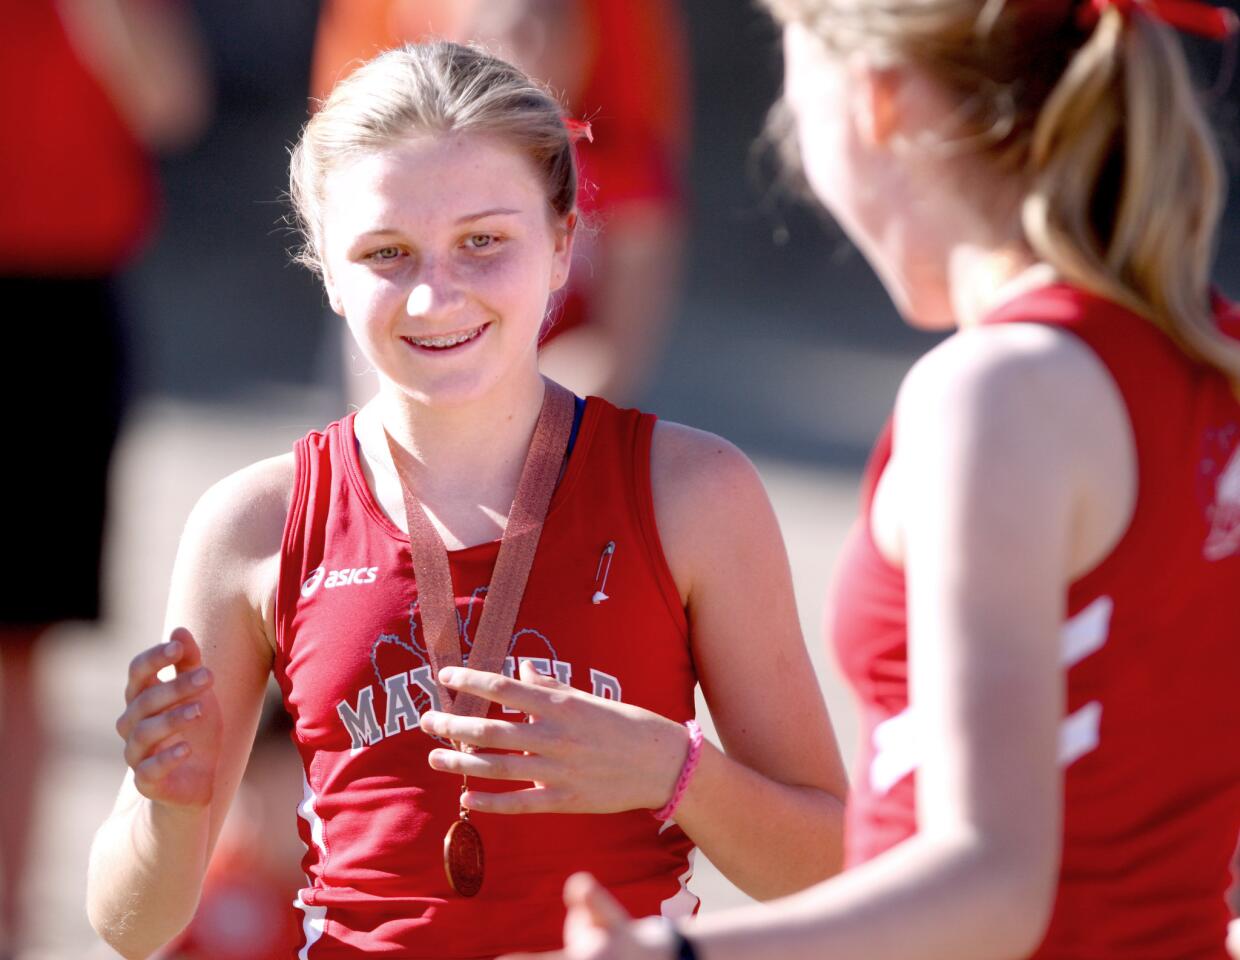 Mayfield High School girls' varsity cross country runner McKenna Smith of La Cañada Flintridge came in third place at the Prep League Cross Country Finals at Pierce College in Woodland Hills on Saturday, Oct. 31, 2015.